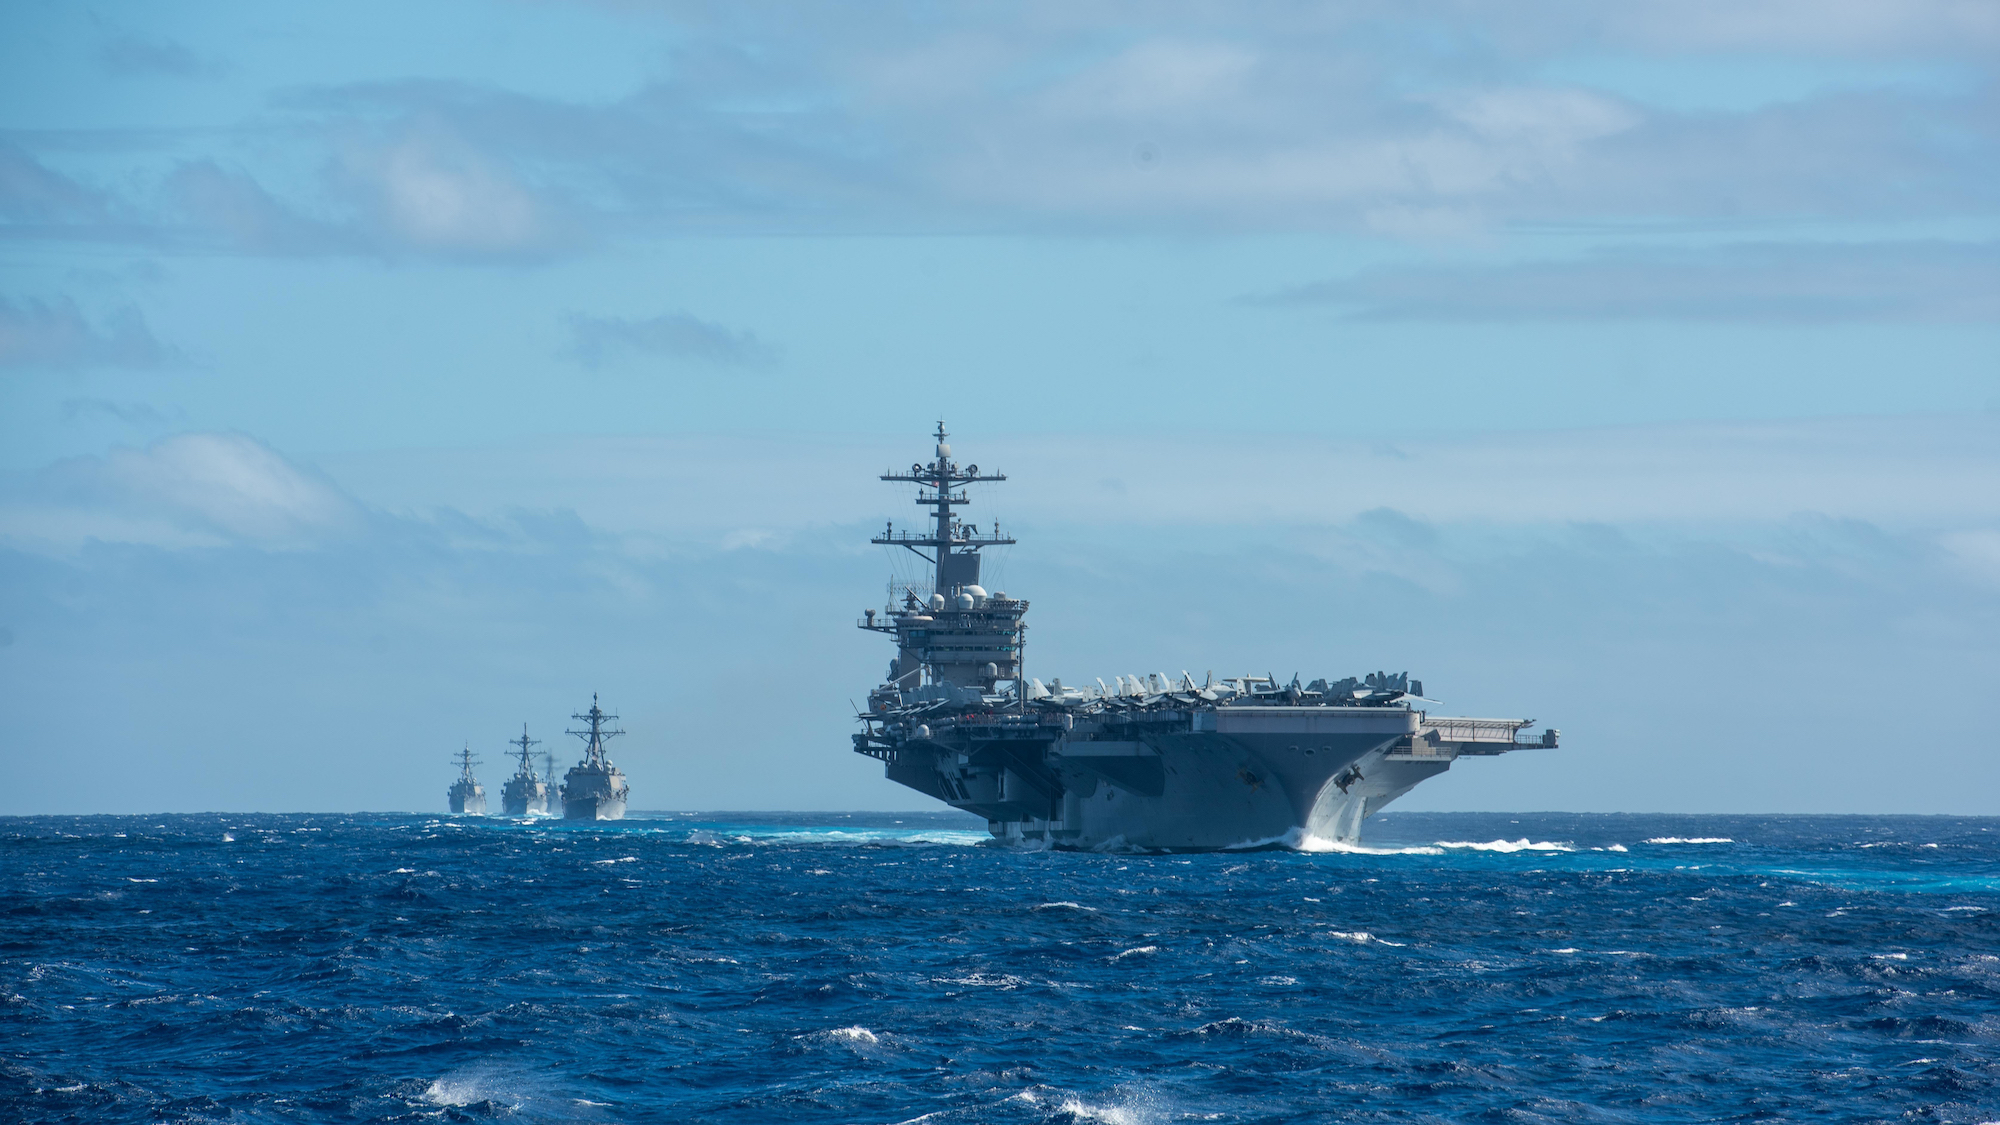 Pacific Ocean (Jan. 25, 2020): The Theodore Roosevelt Carrier Strike Group transits the Pacific Ocean.